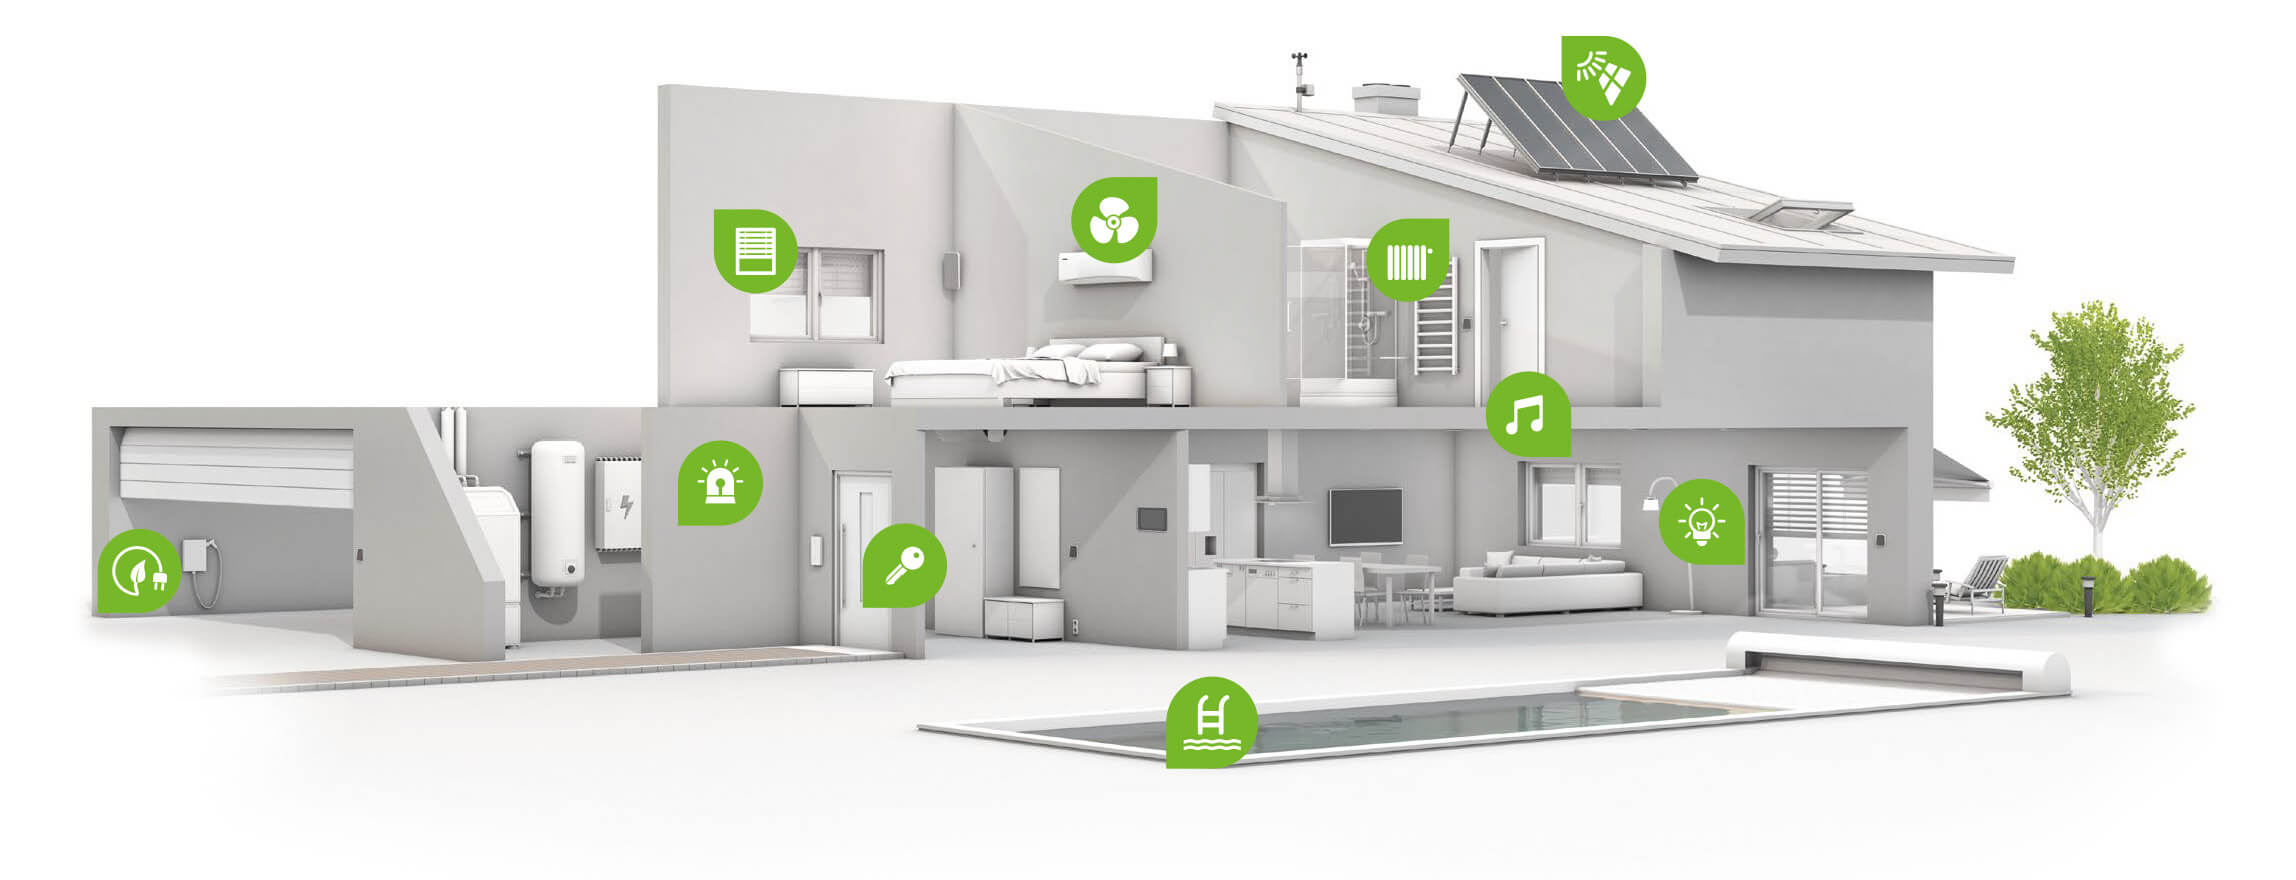 True home automation with Loxone Smart Home products